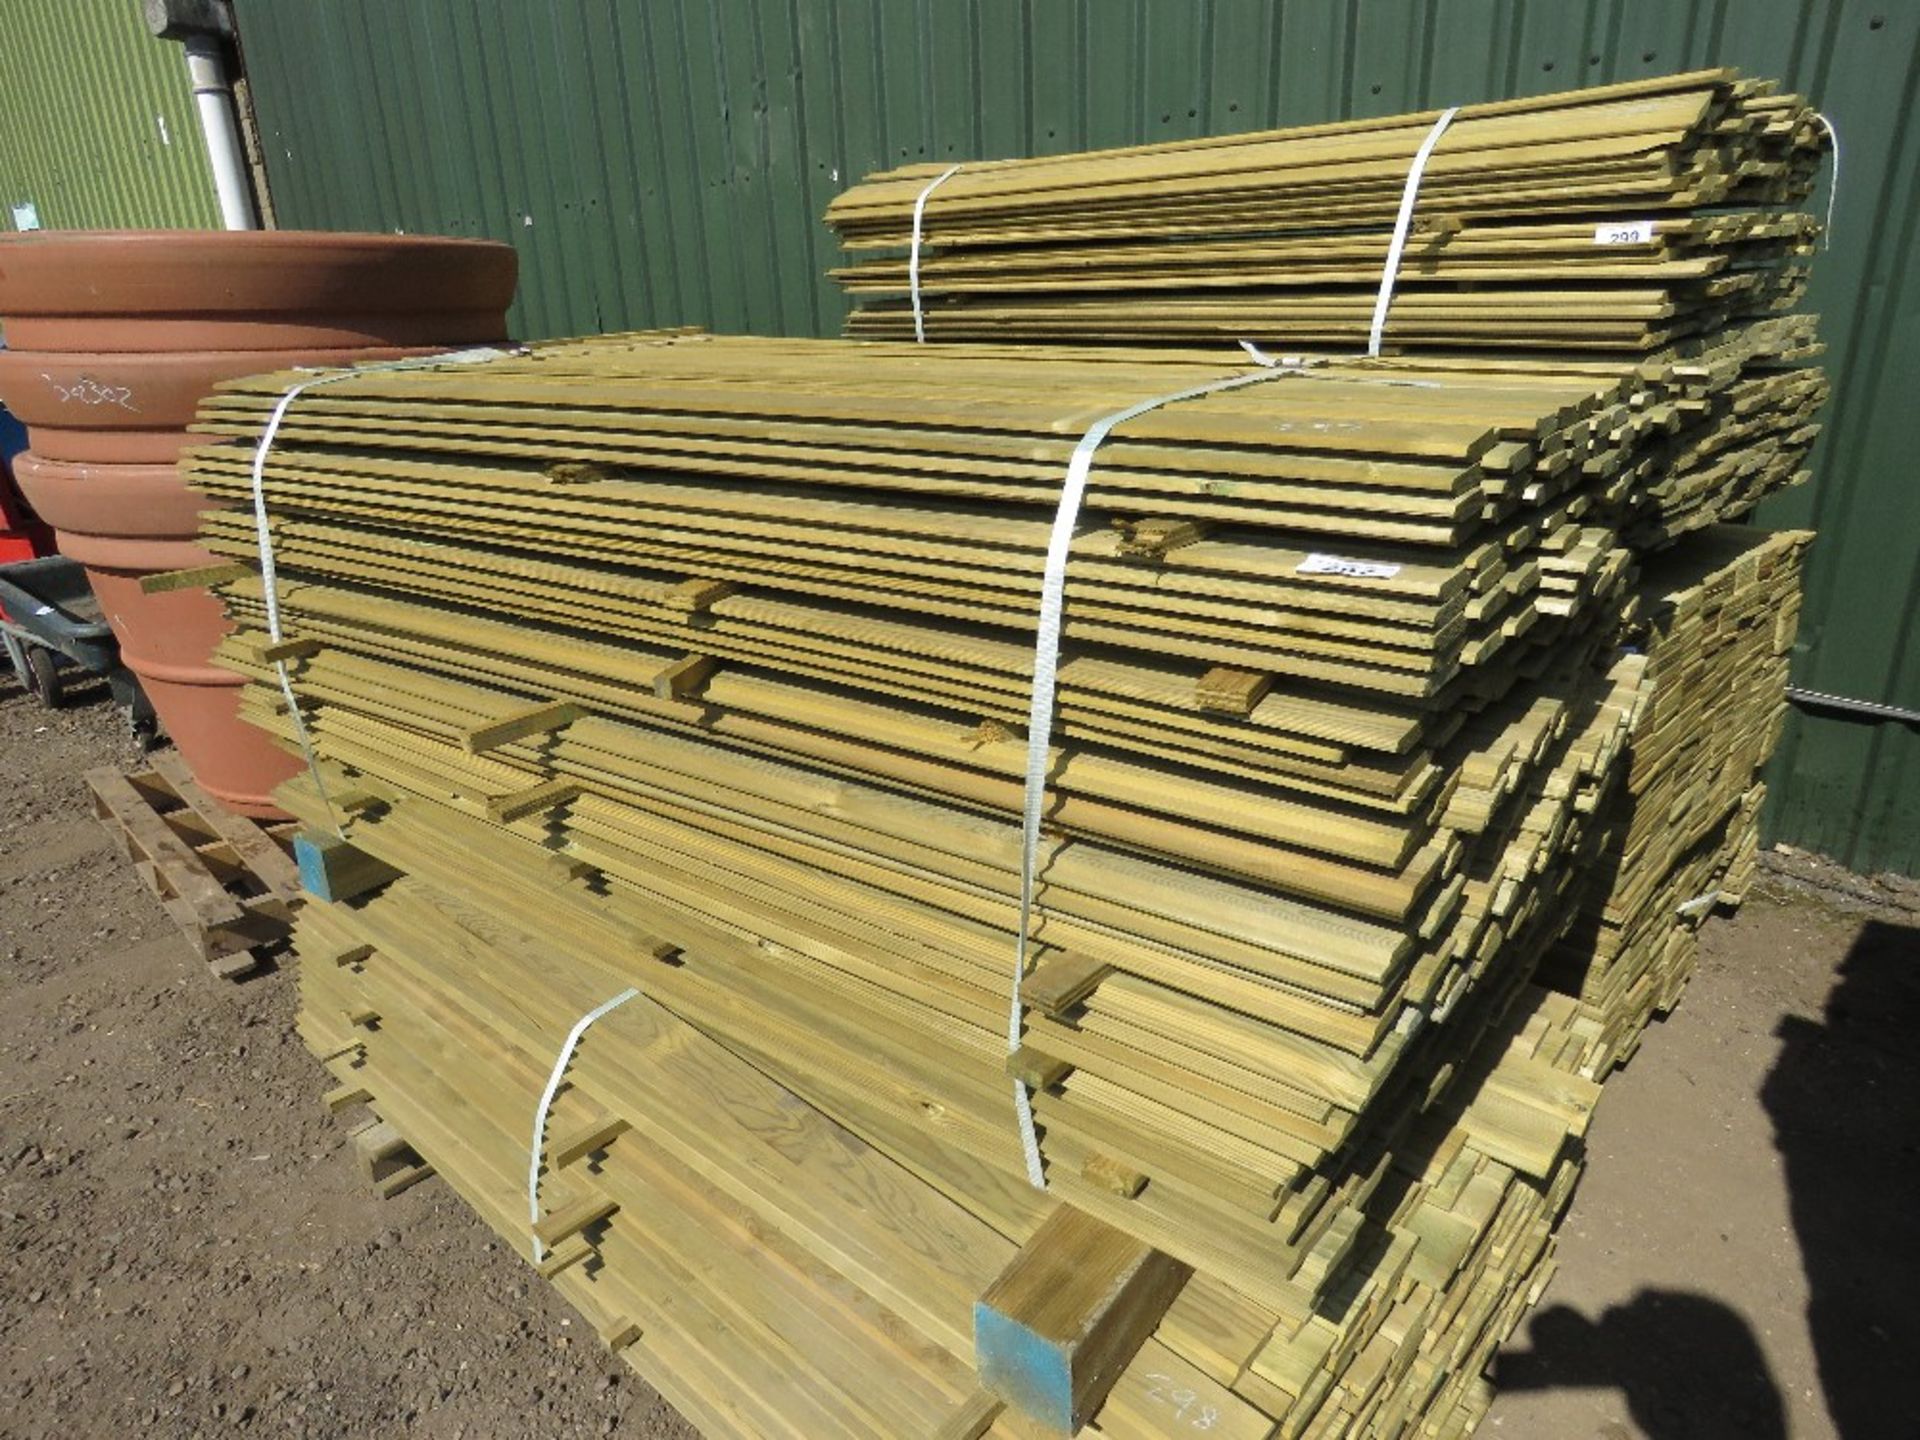 PACK OF PRESSURE TREATED SHIPLAP TIMBER FENCE CLADDING BOARDS, 1.73M LENGTH X 9.5CM WIDTH APPROX.